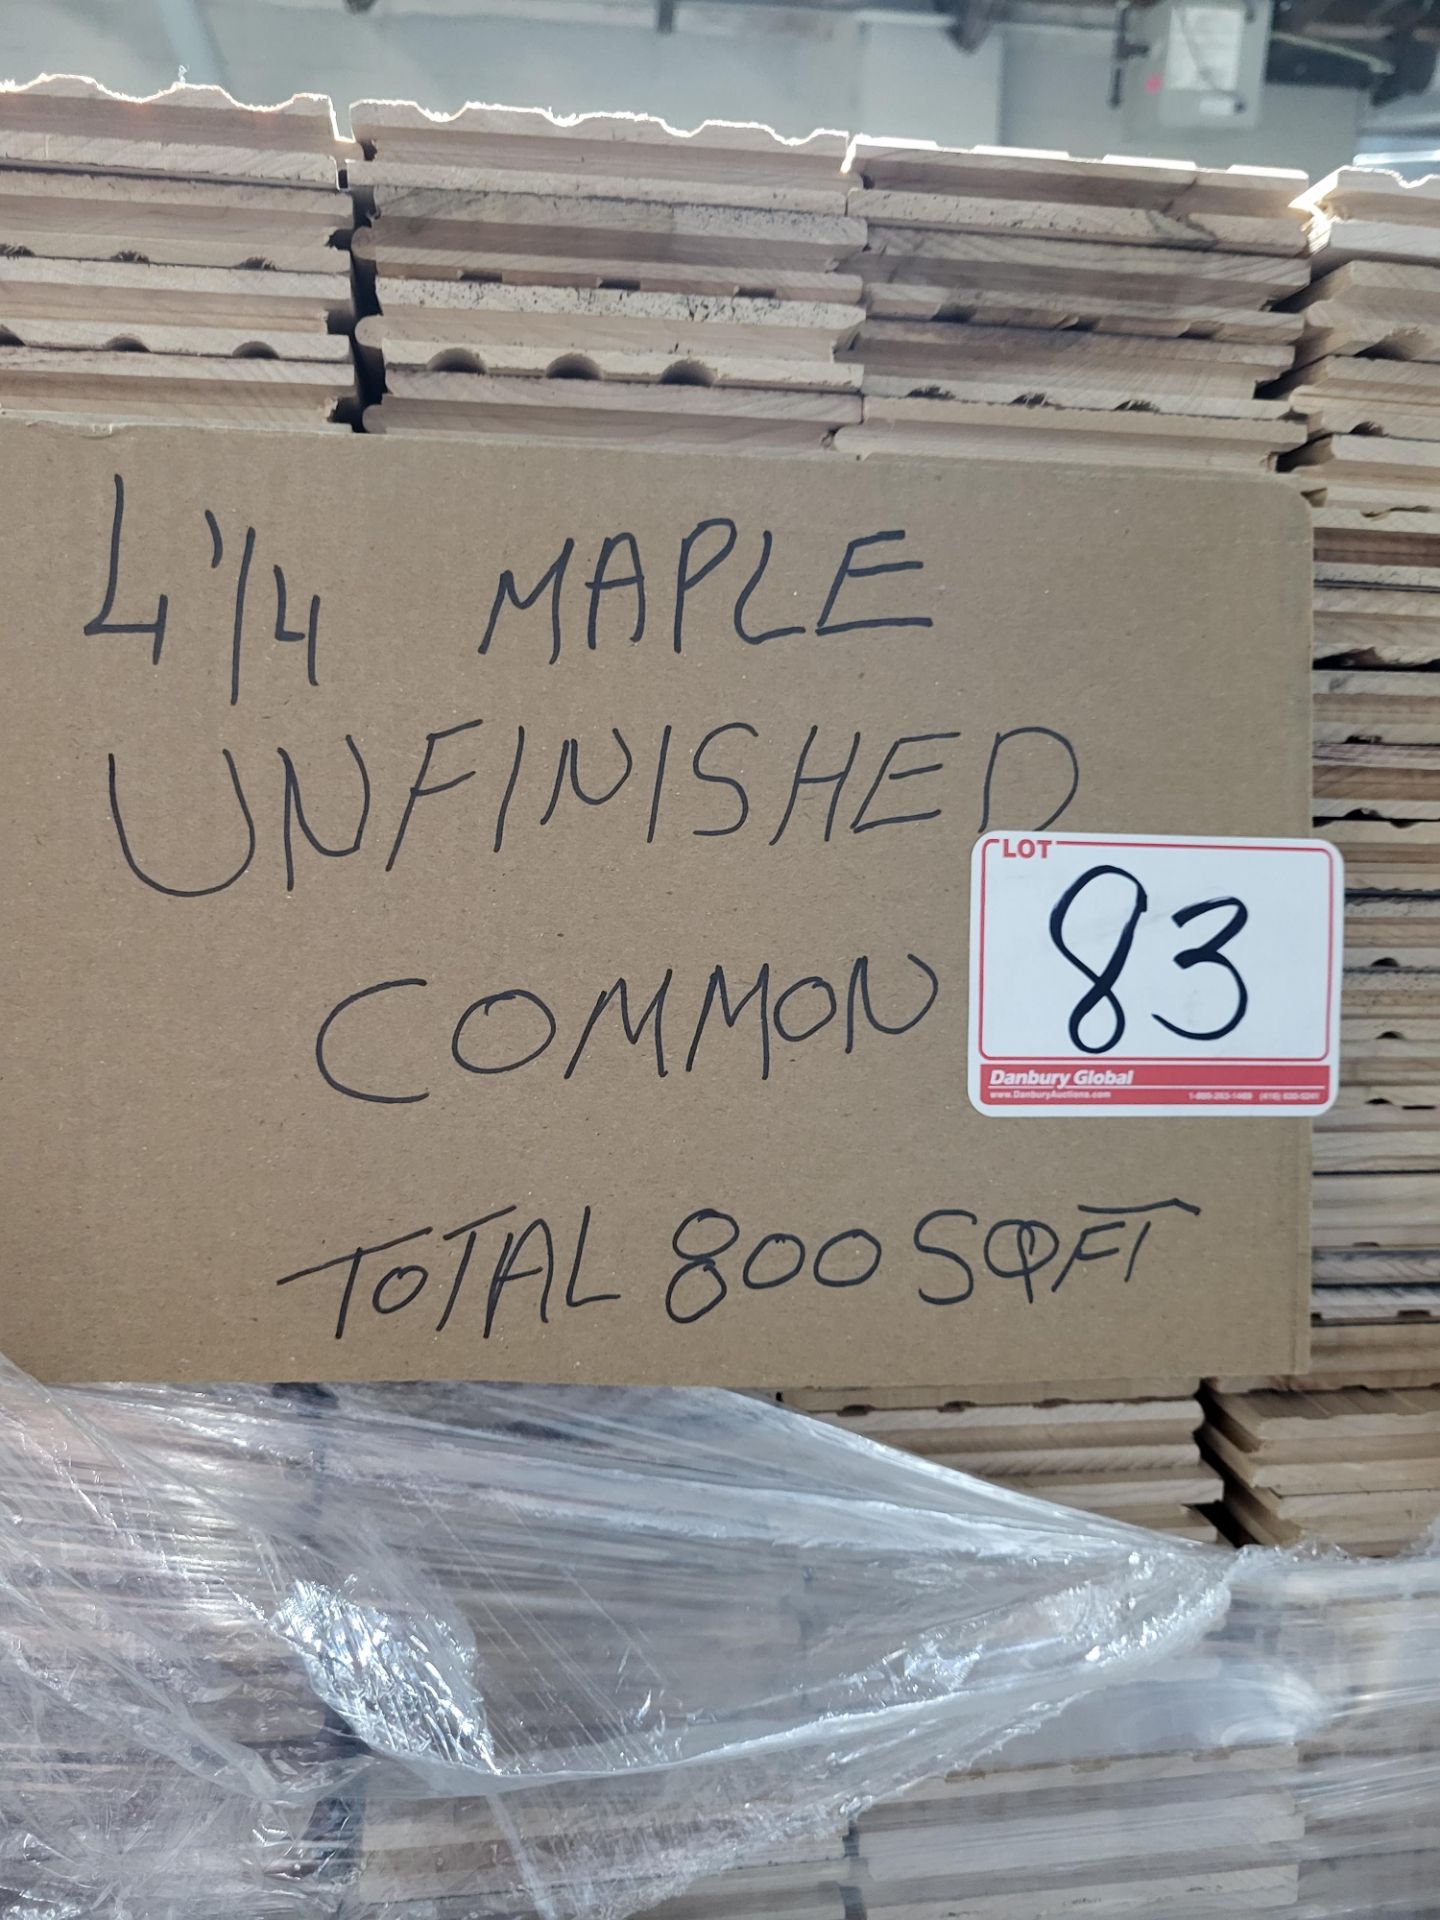 LOT - 4 1/4" MAPLE SQ EDGE UNFINISHED COMMON GRADE SOLID HARDWOOD FLOORING (APPROX 800 SQFT)